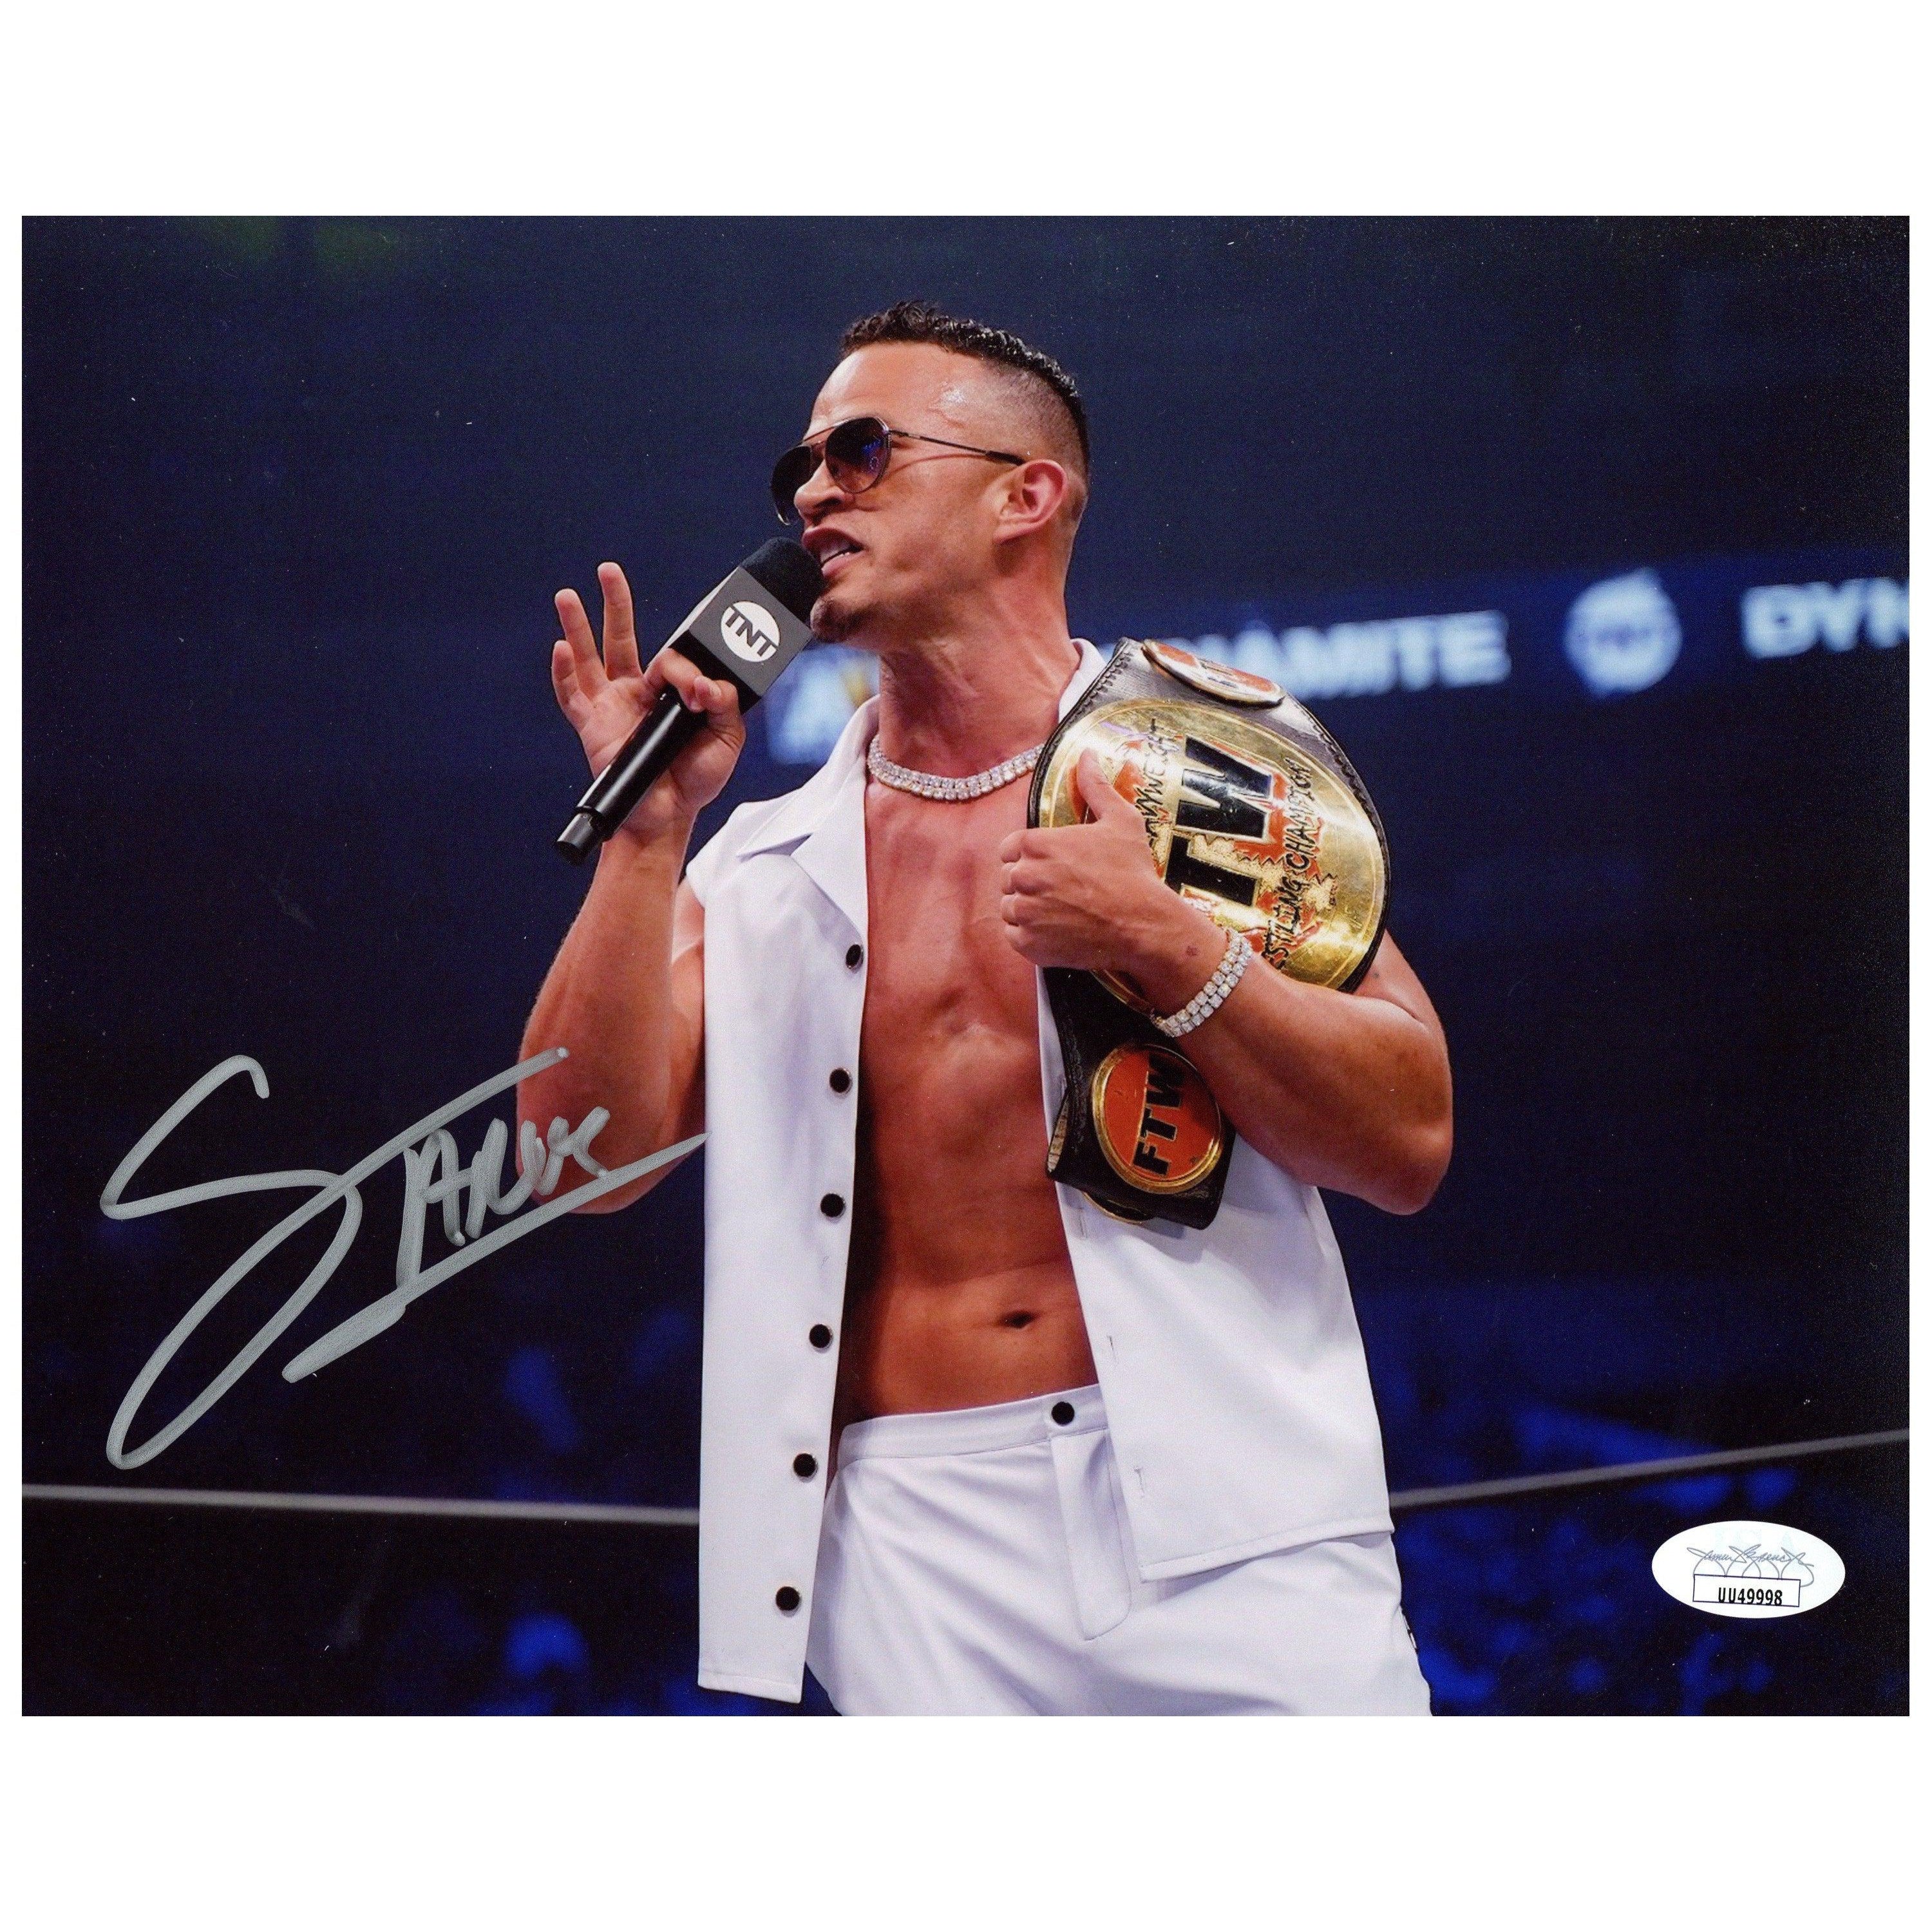 Danhausen Signed Autographed 8x10 Photo - Wrestling AEW Very Evil